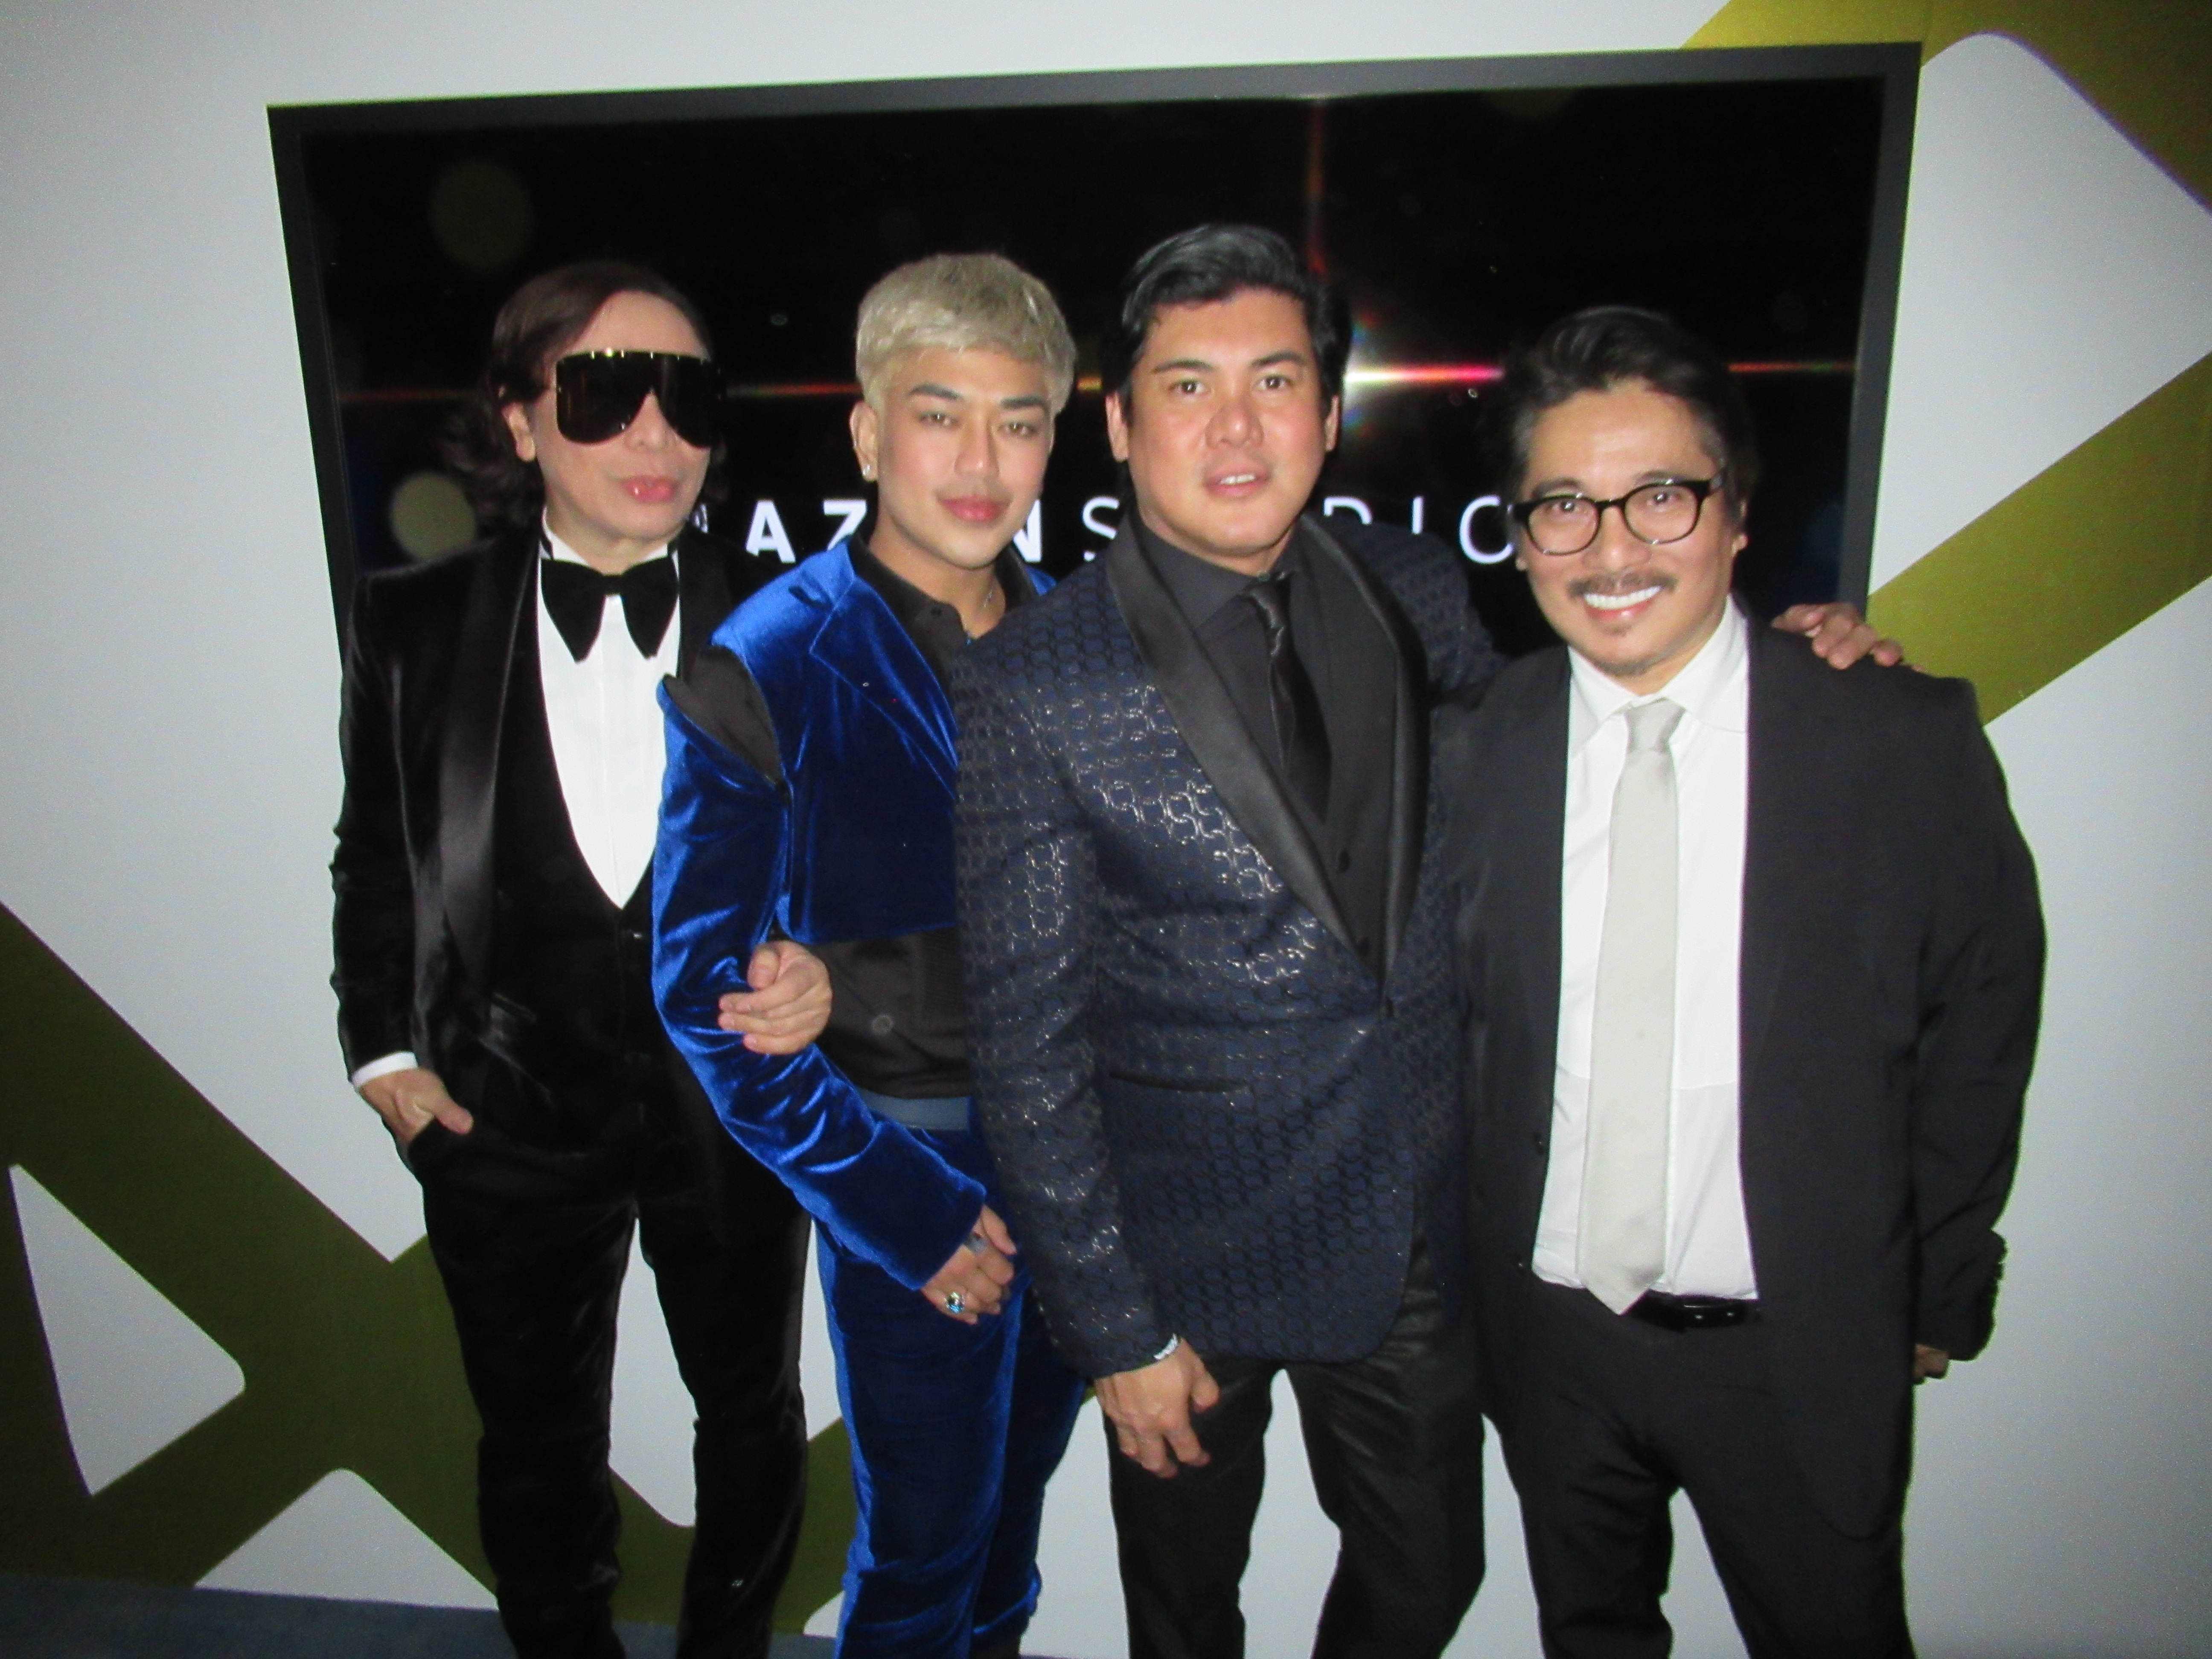 Four Filipino designers together in one place: (fromleft) Cinco, Kenneth Barlis, Oliver Tolentino and Alan del Rosario